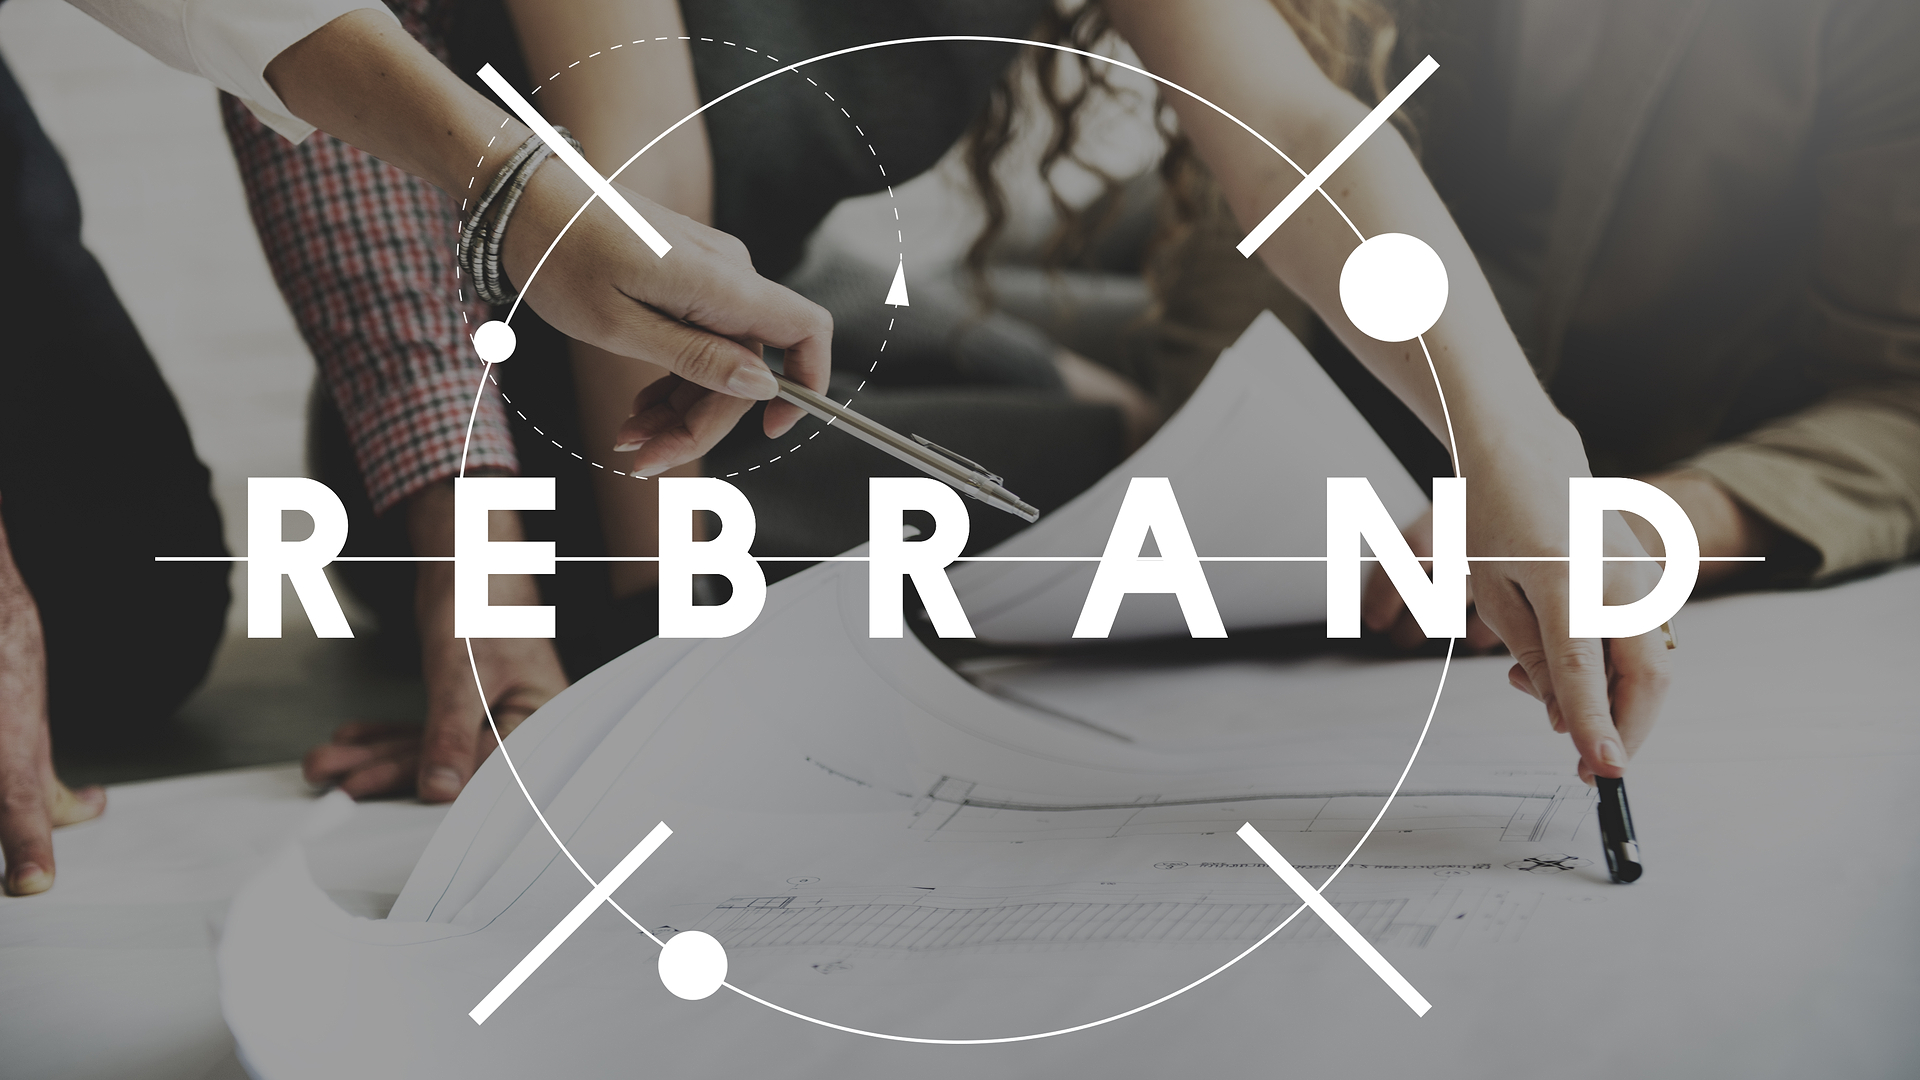 Top tips to consider when it’s time to rebrand on social media